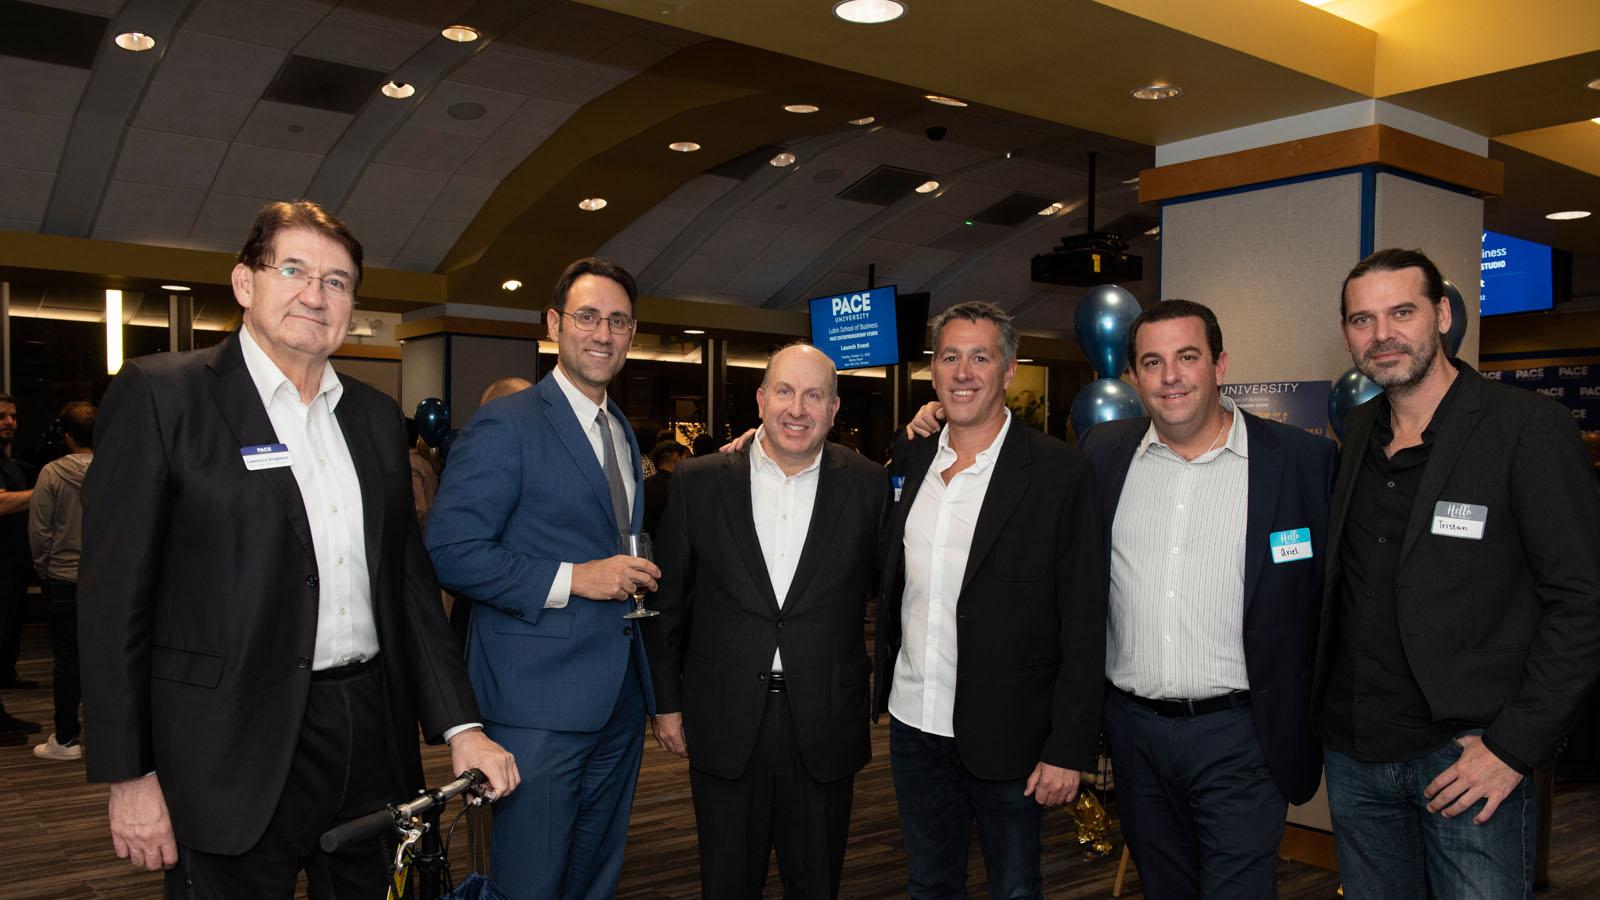 Dean Lawrence G. Singleton (far left), Pace President Marvin Krislov (third from left), and Roy Geva Glasberg and Ariel Cohen from AnD Ventures (fourth and fifth from the left) at the Pace Entrepreneurship Studio launch event.